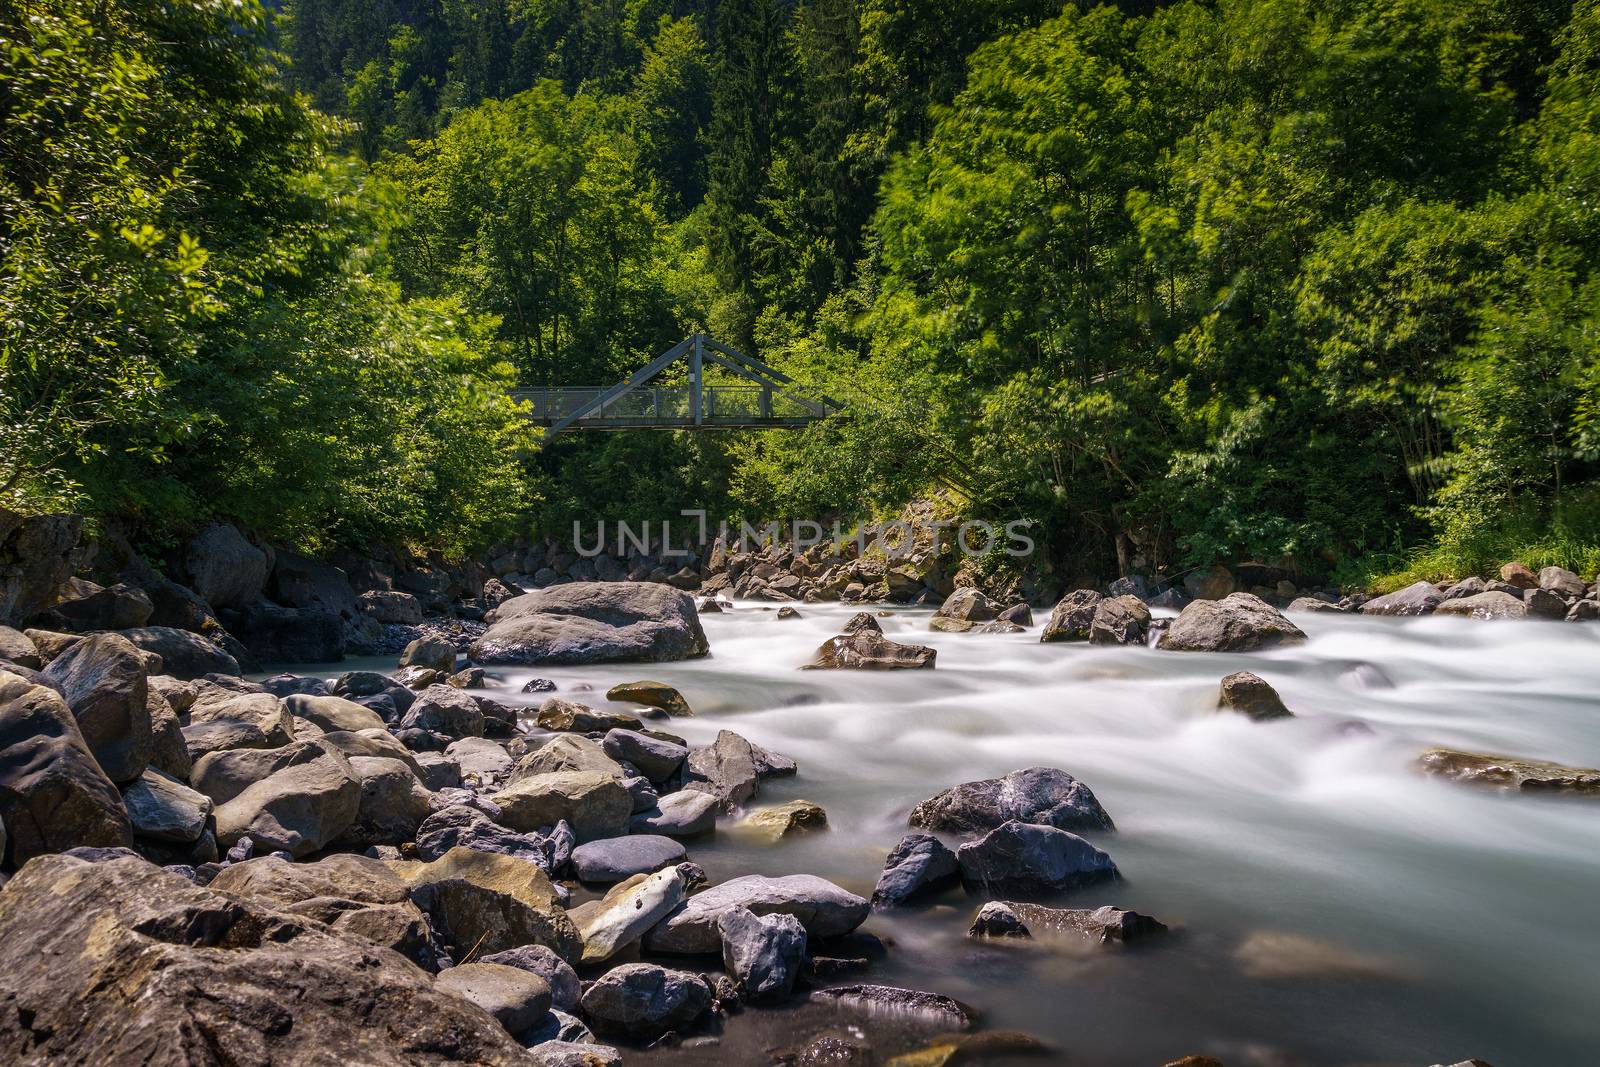 Kander river flowing near Blausee lake in the Bernese Oberland, Switzerland by nickfox